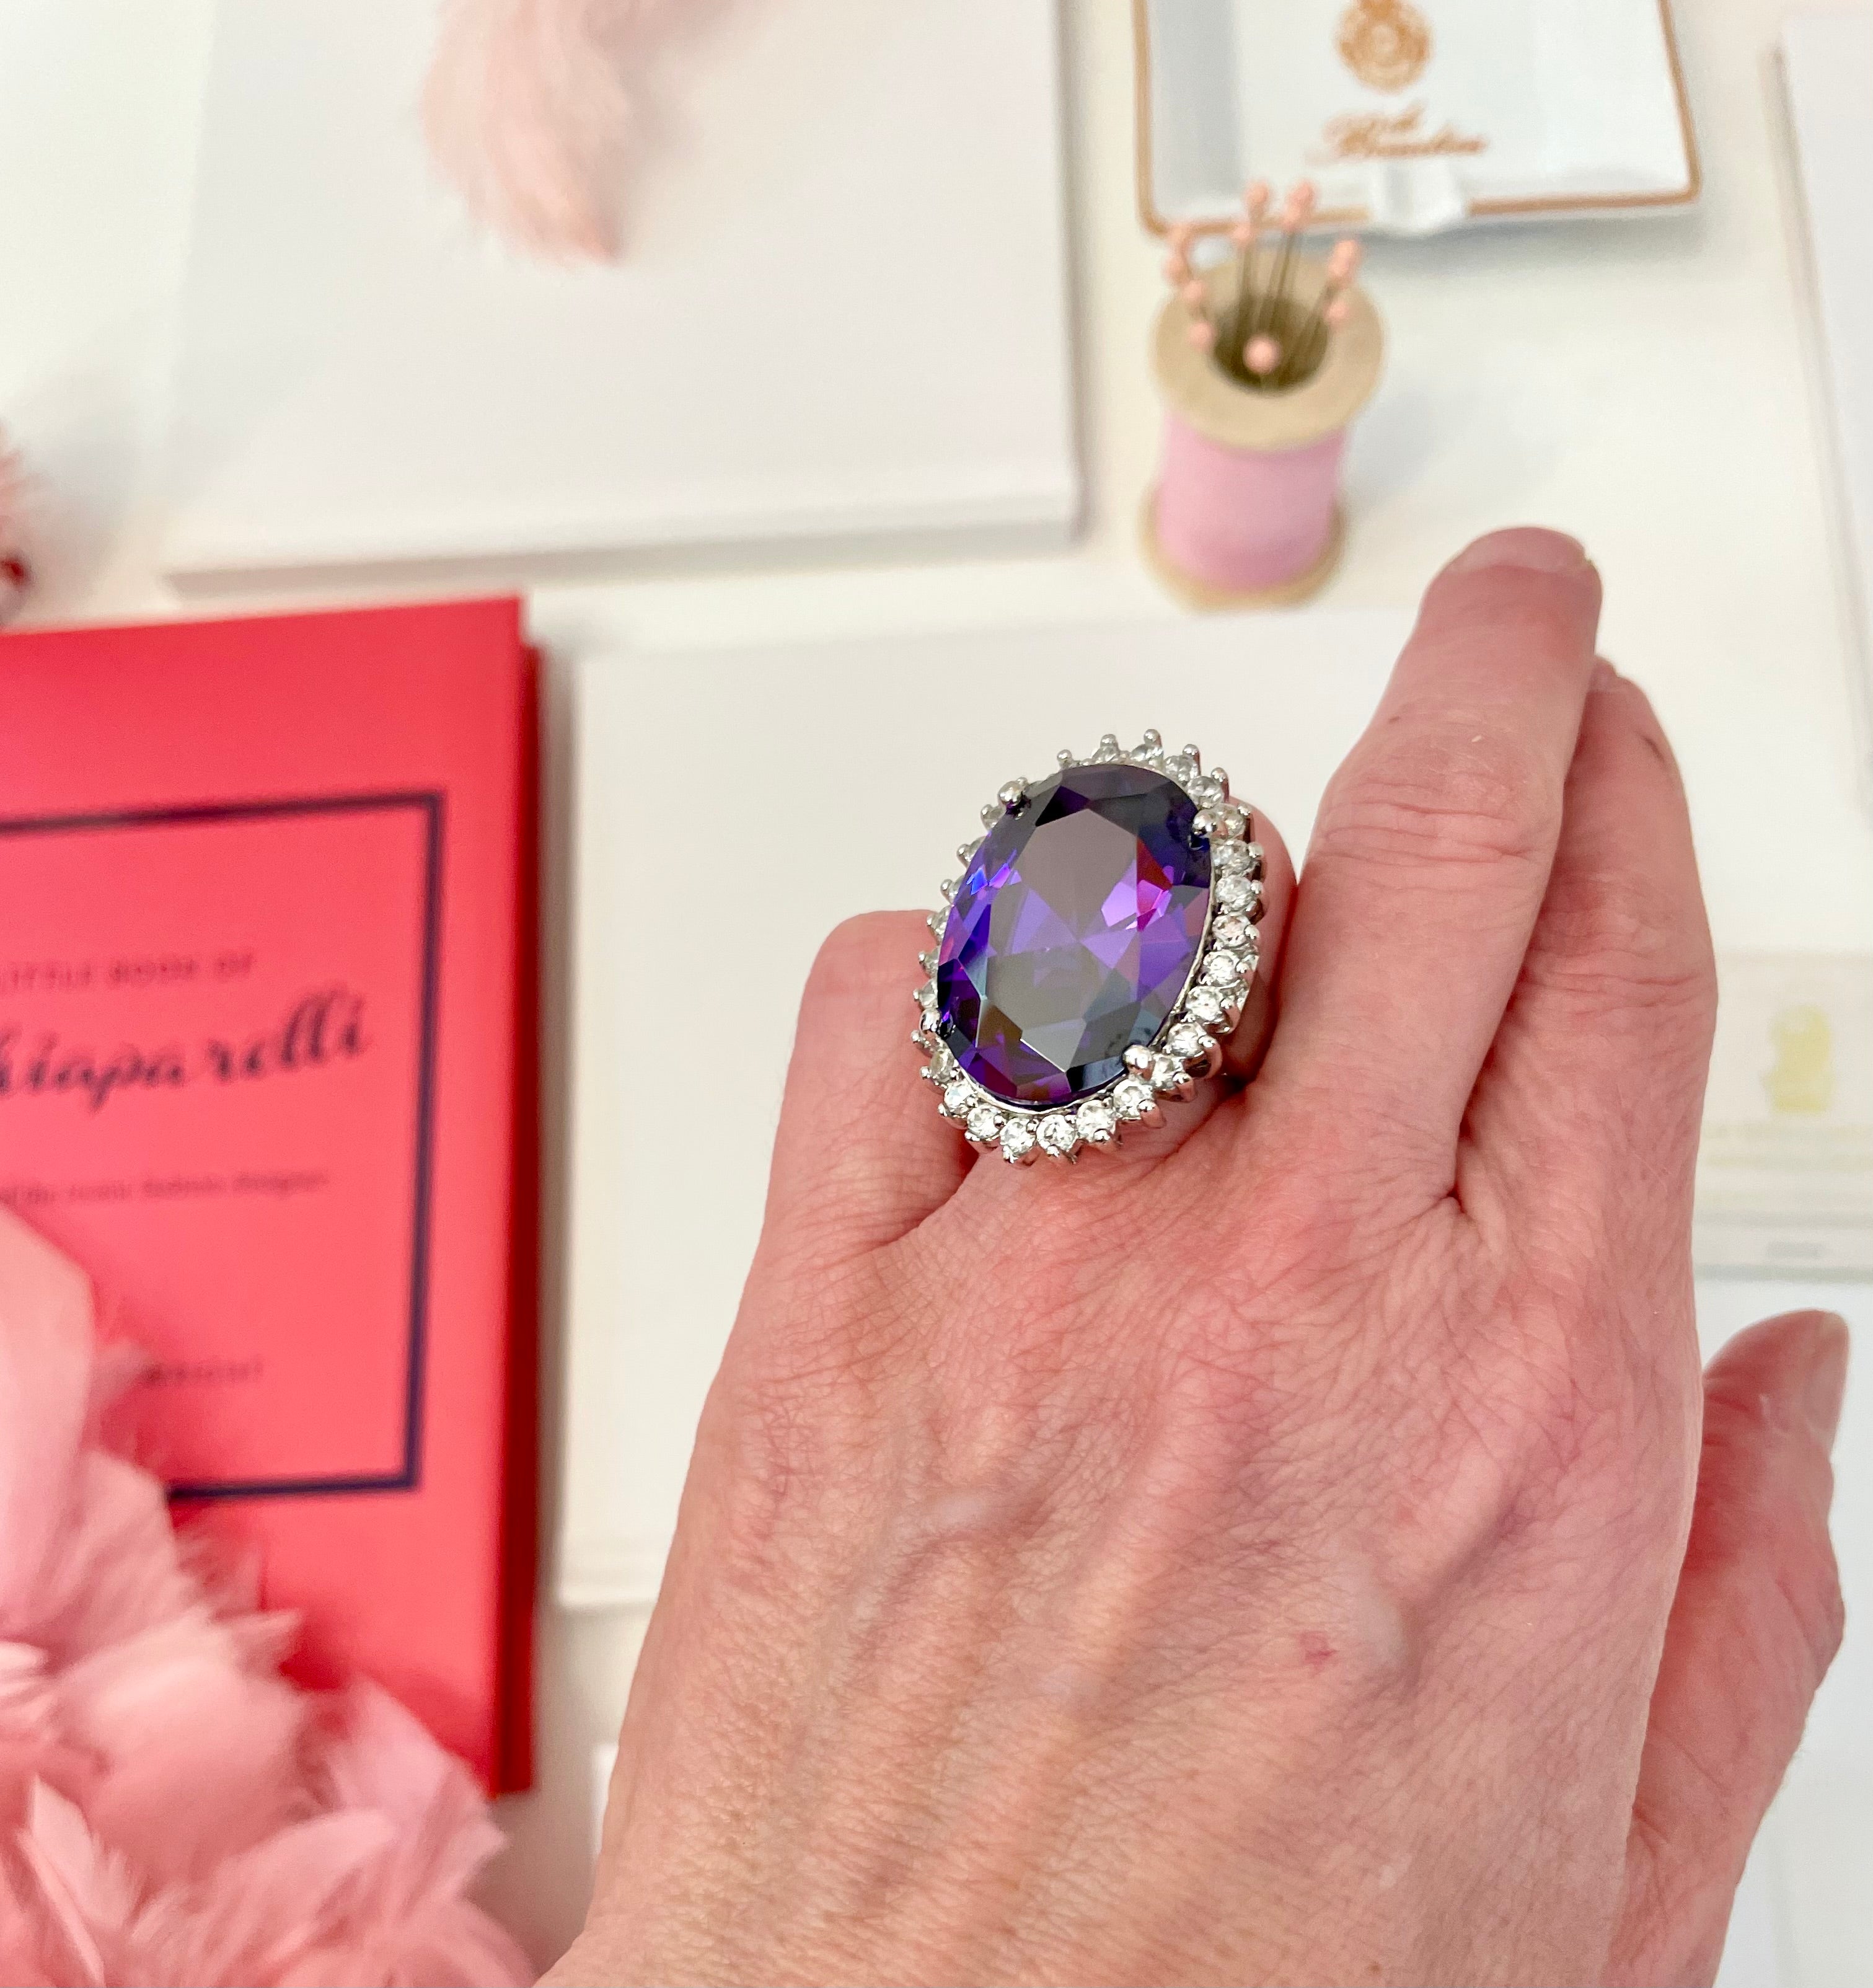 Stunning 1970's showstopper purple glass cocktail ring!